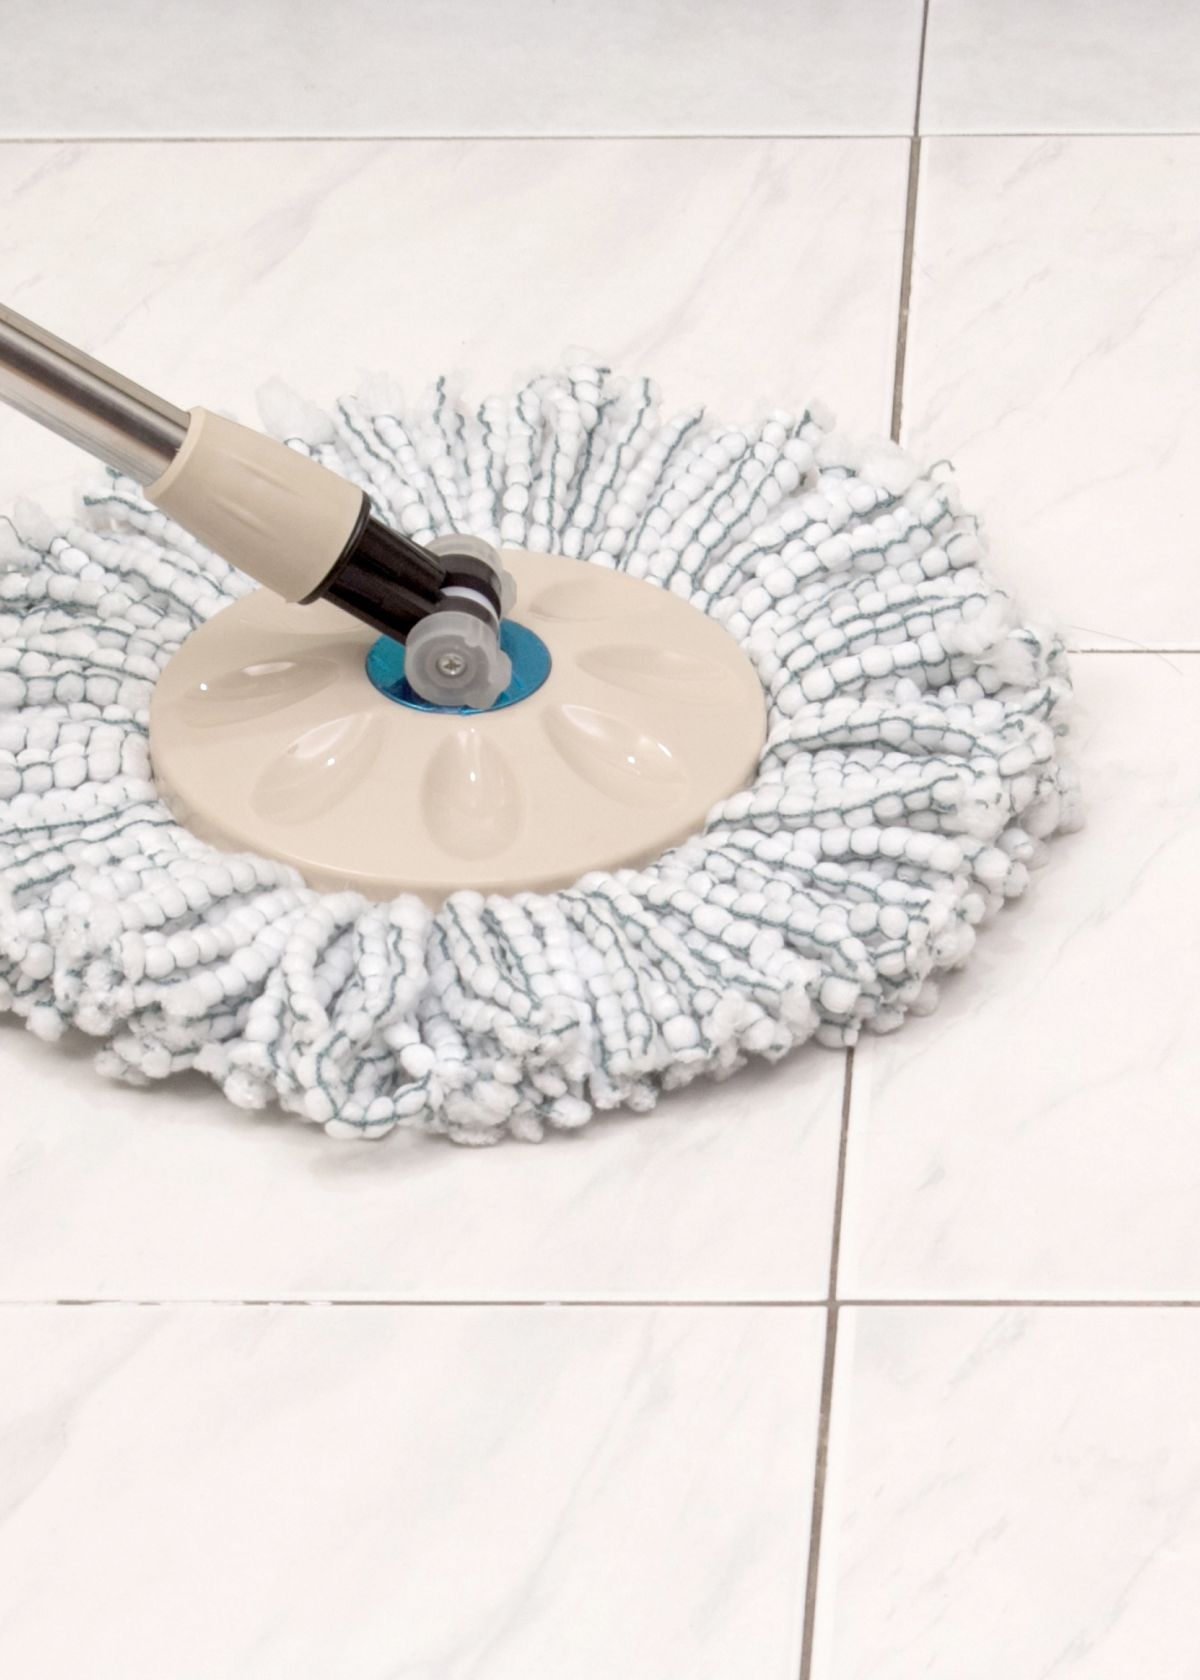 Cleaning mop on tile floor - How to Clean Sticky Floor Tile